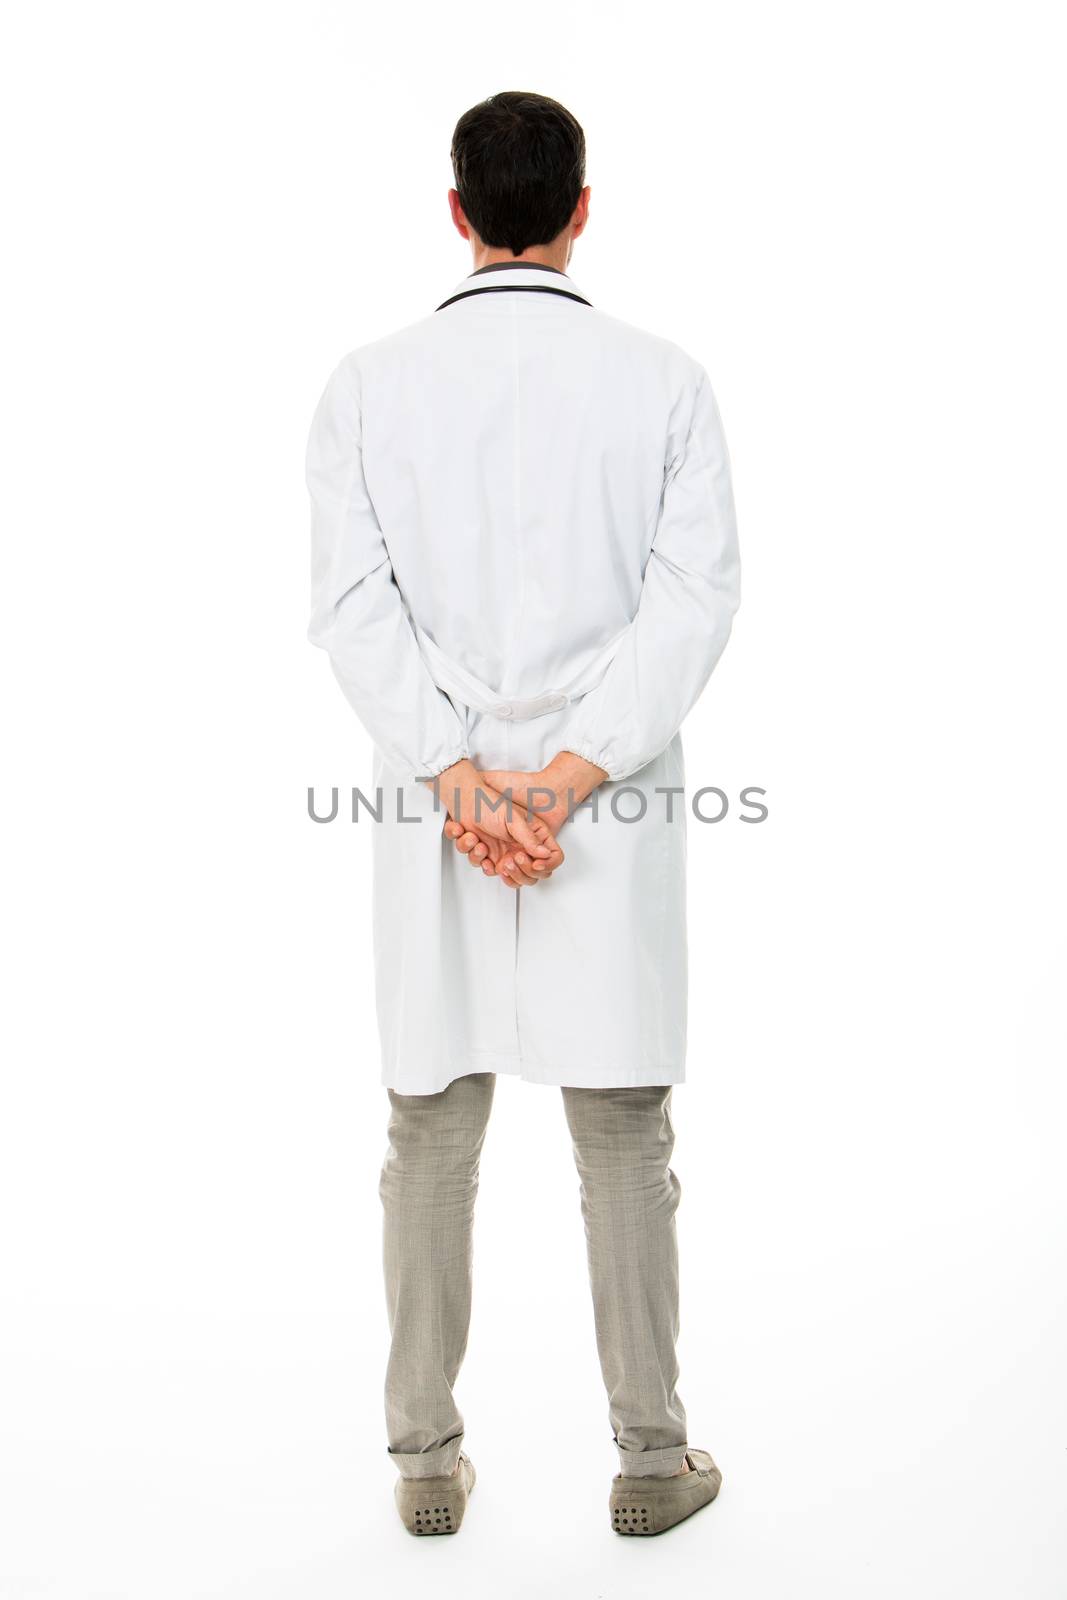 male doctor back view by Flareimage